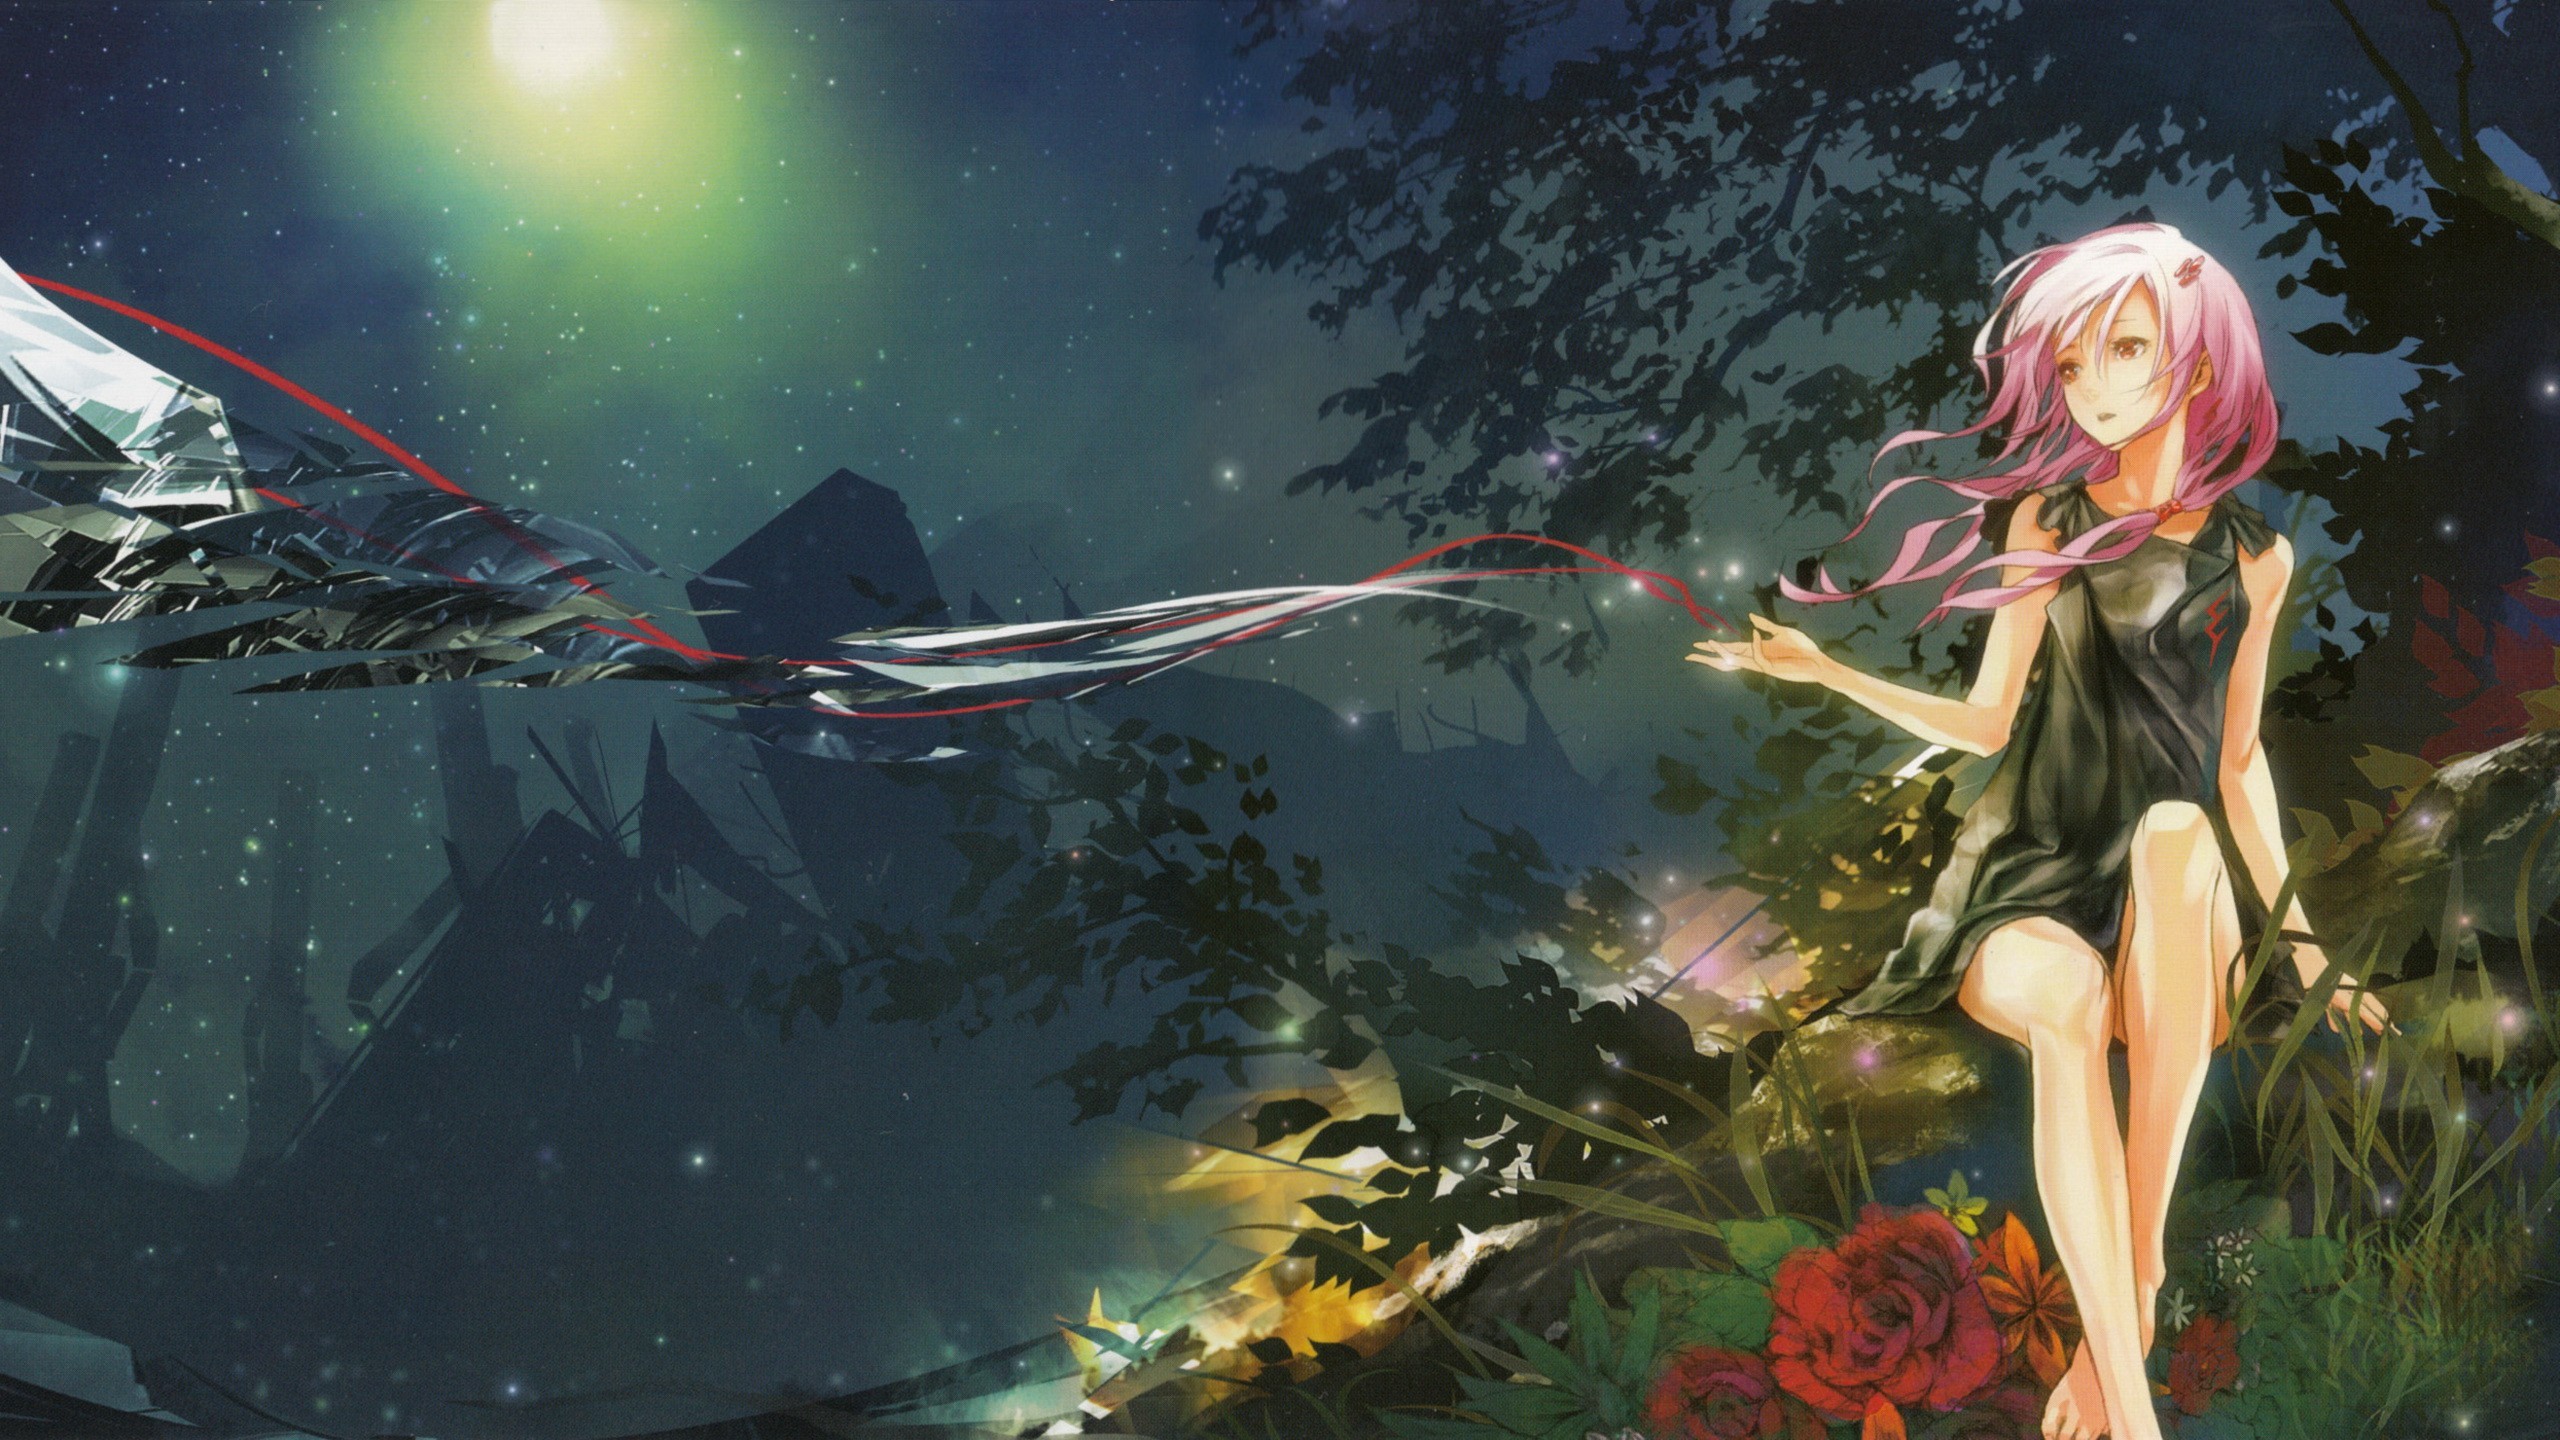 Anime 2560x1440 Guilty Crown Yuzuriha Inori anime anime girls landscape fantasy girl flowers Redjuice sitting legs pink hair night sky Moon plants looking into the distance women outdoors women outdoors